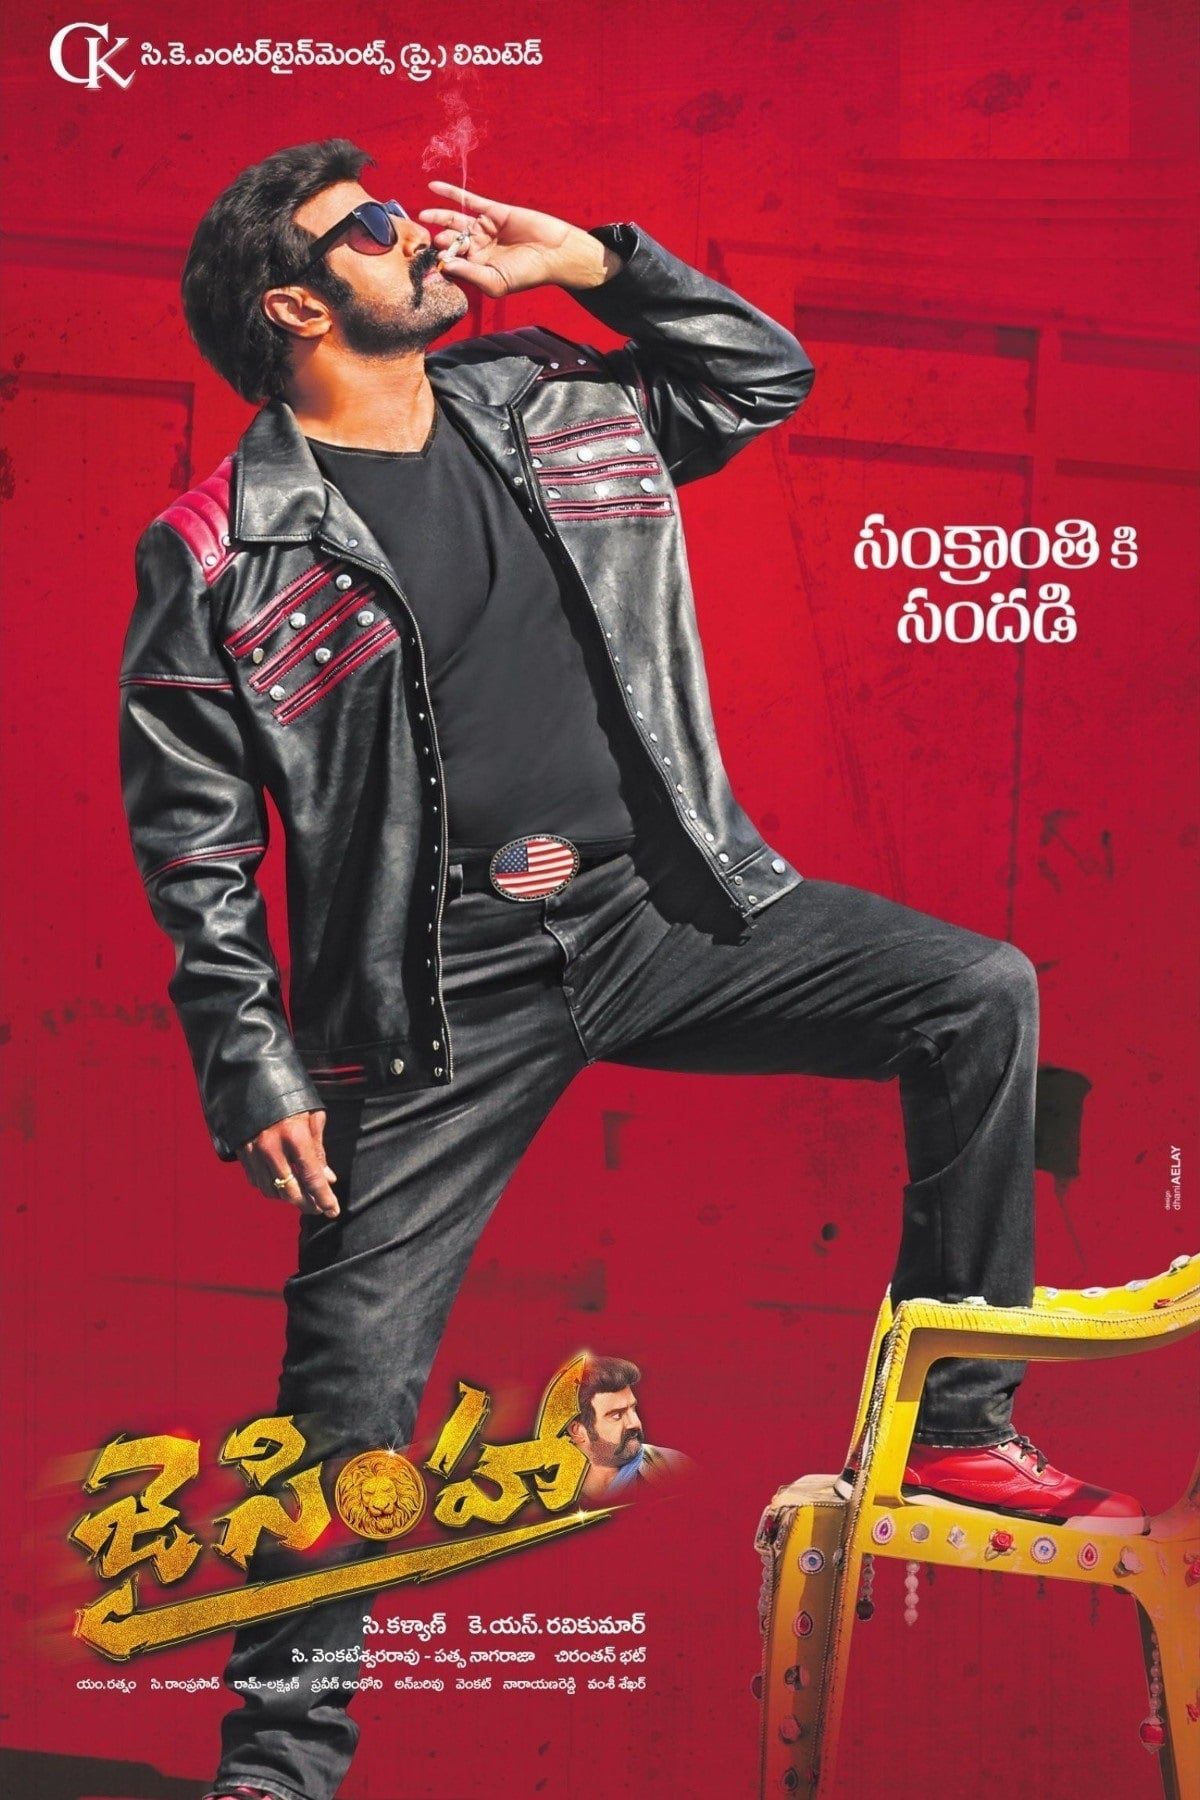 Poster for the movie "Jai Simha"